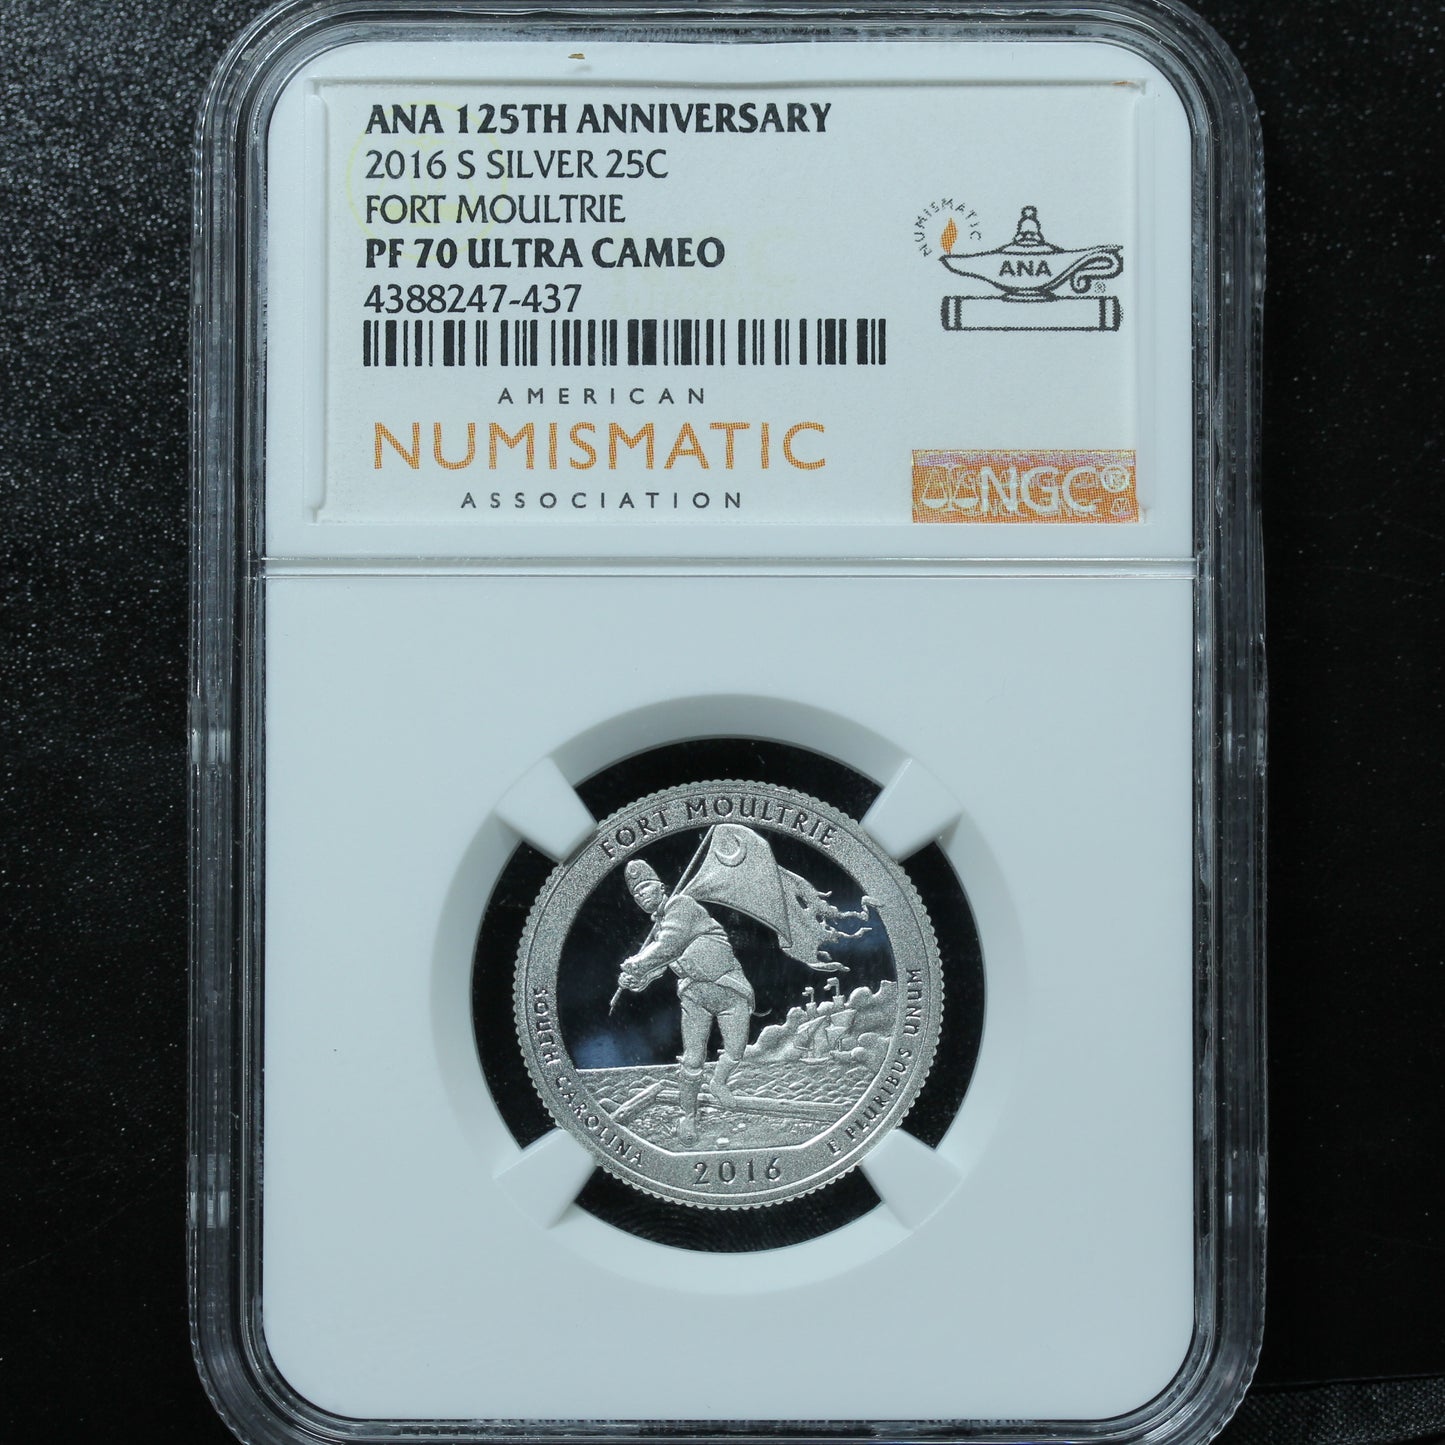 2016 25c Fort Moultrie S Carolina Silver NGC PF70 UCAM ANA 125th Annv.